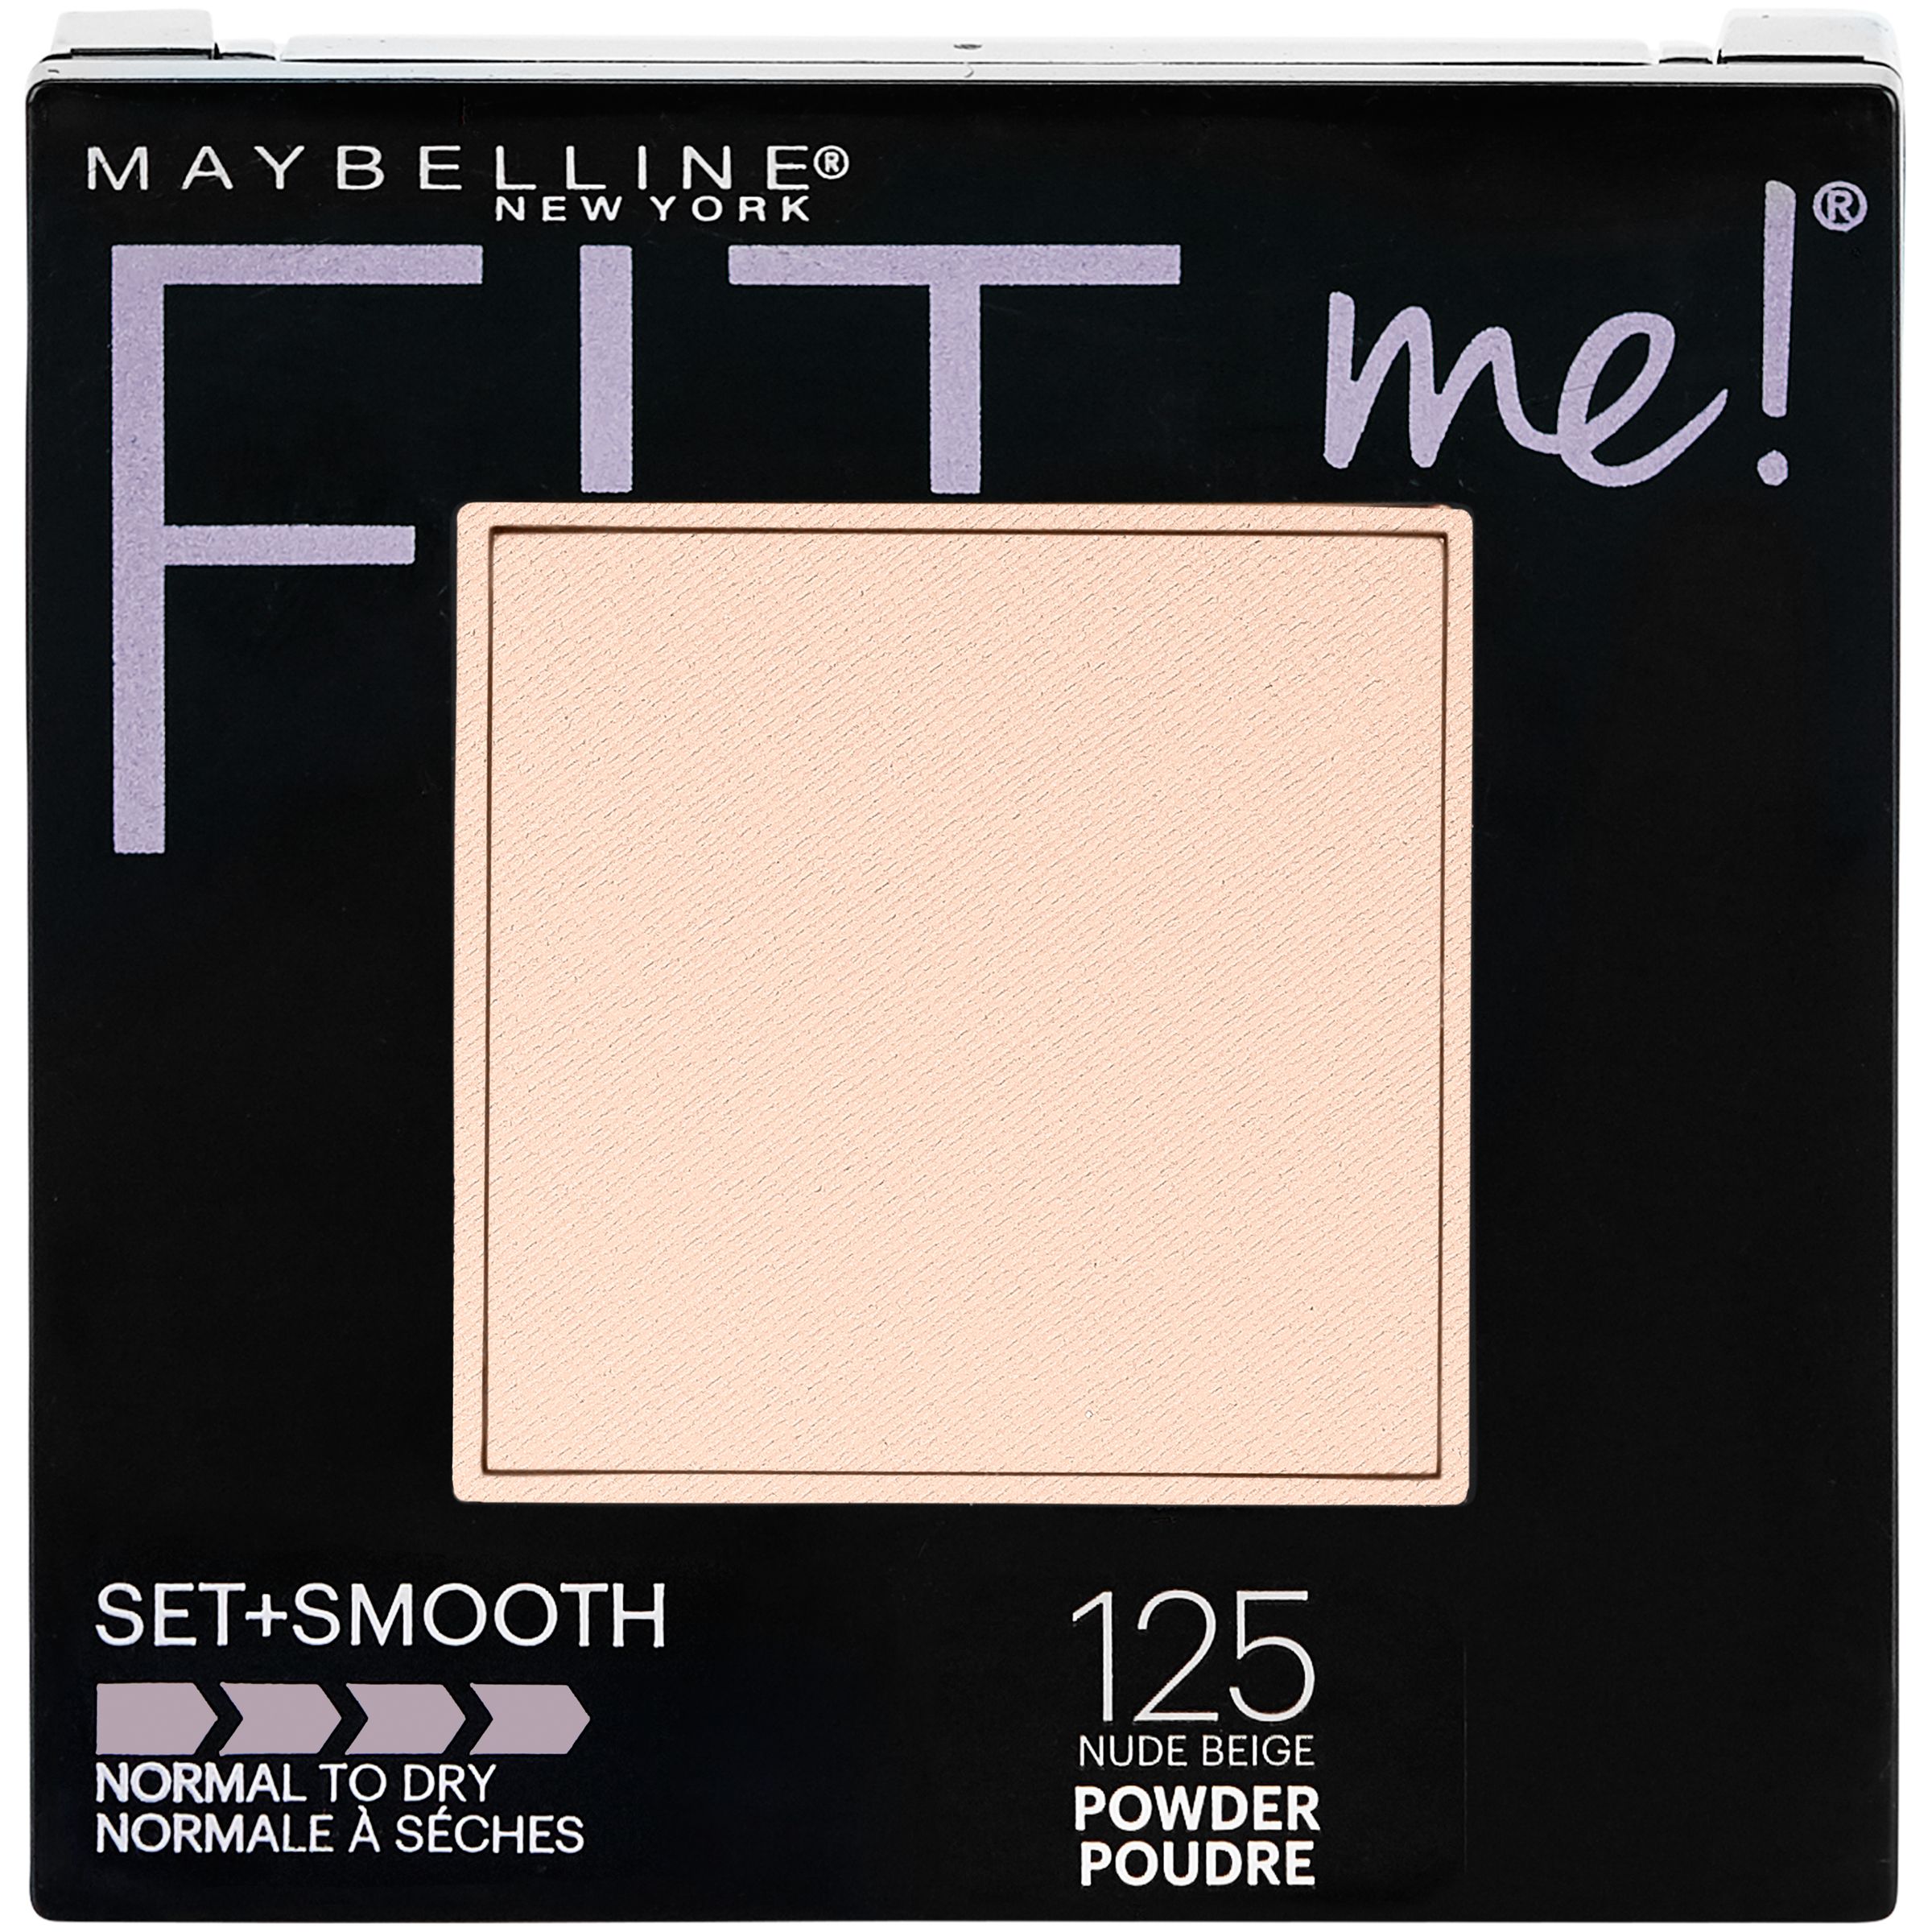 Maybelline Fit Me Set + Smooth Powder, Nude Beige - image 1 of 7